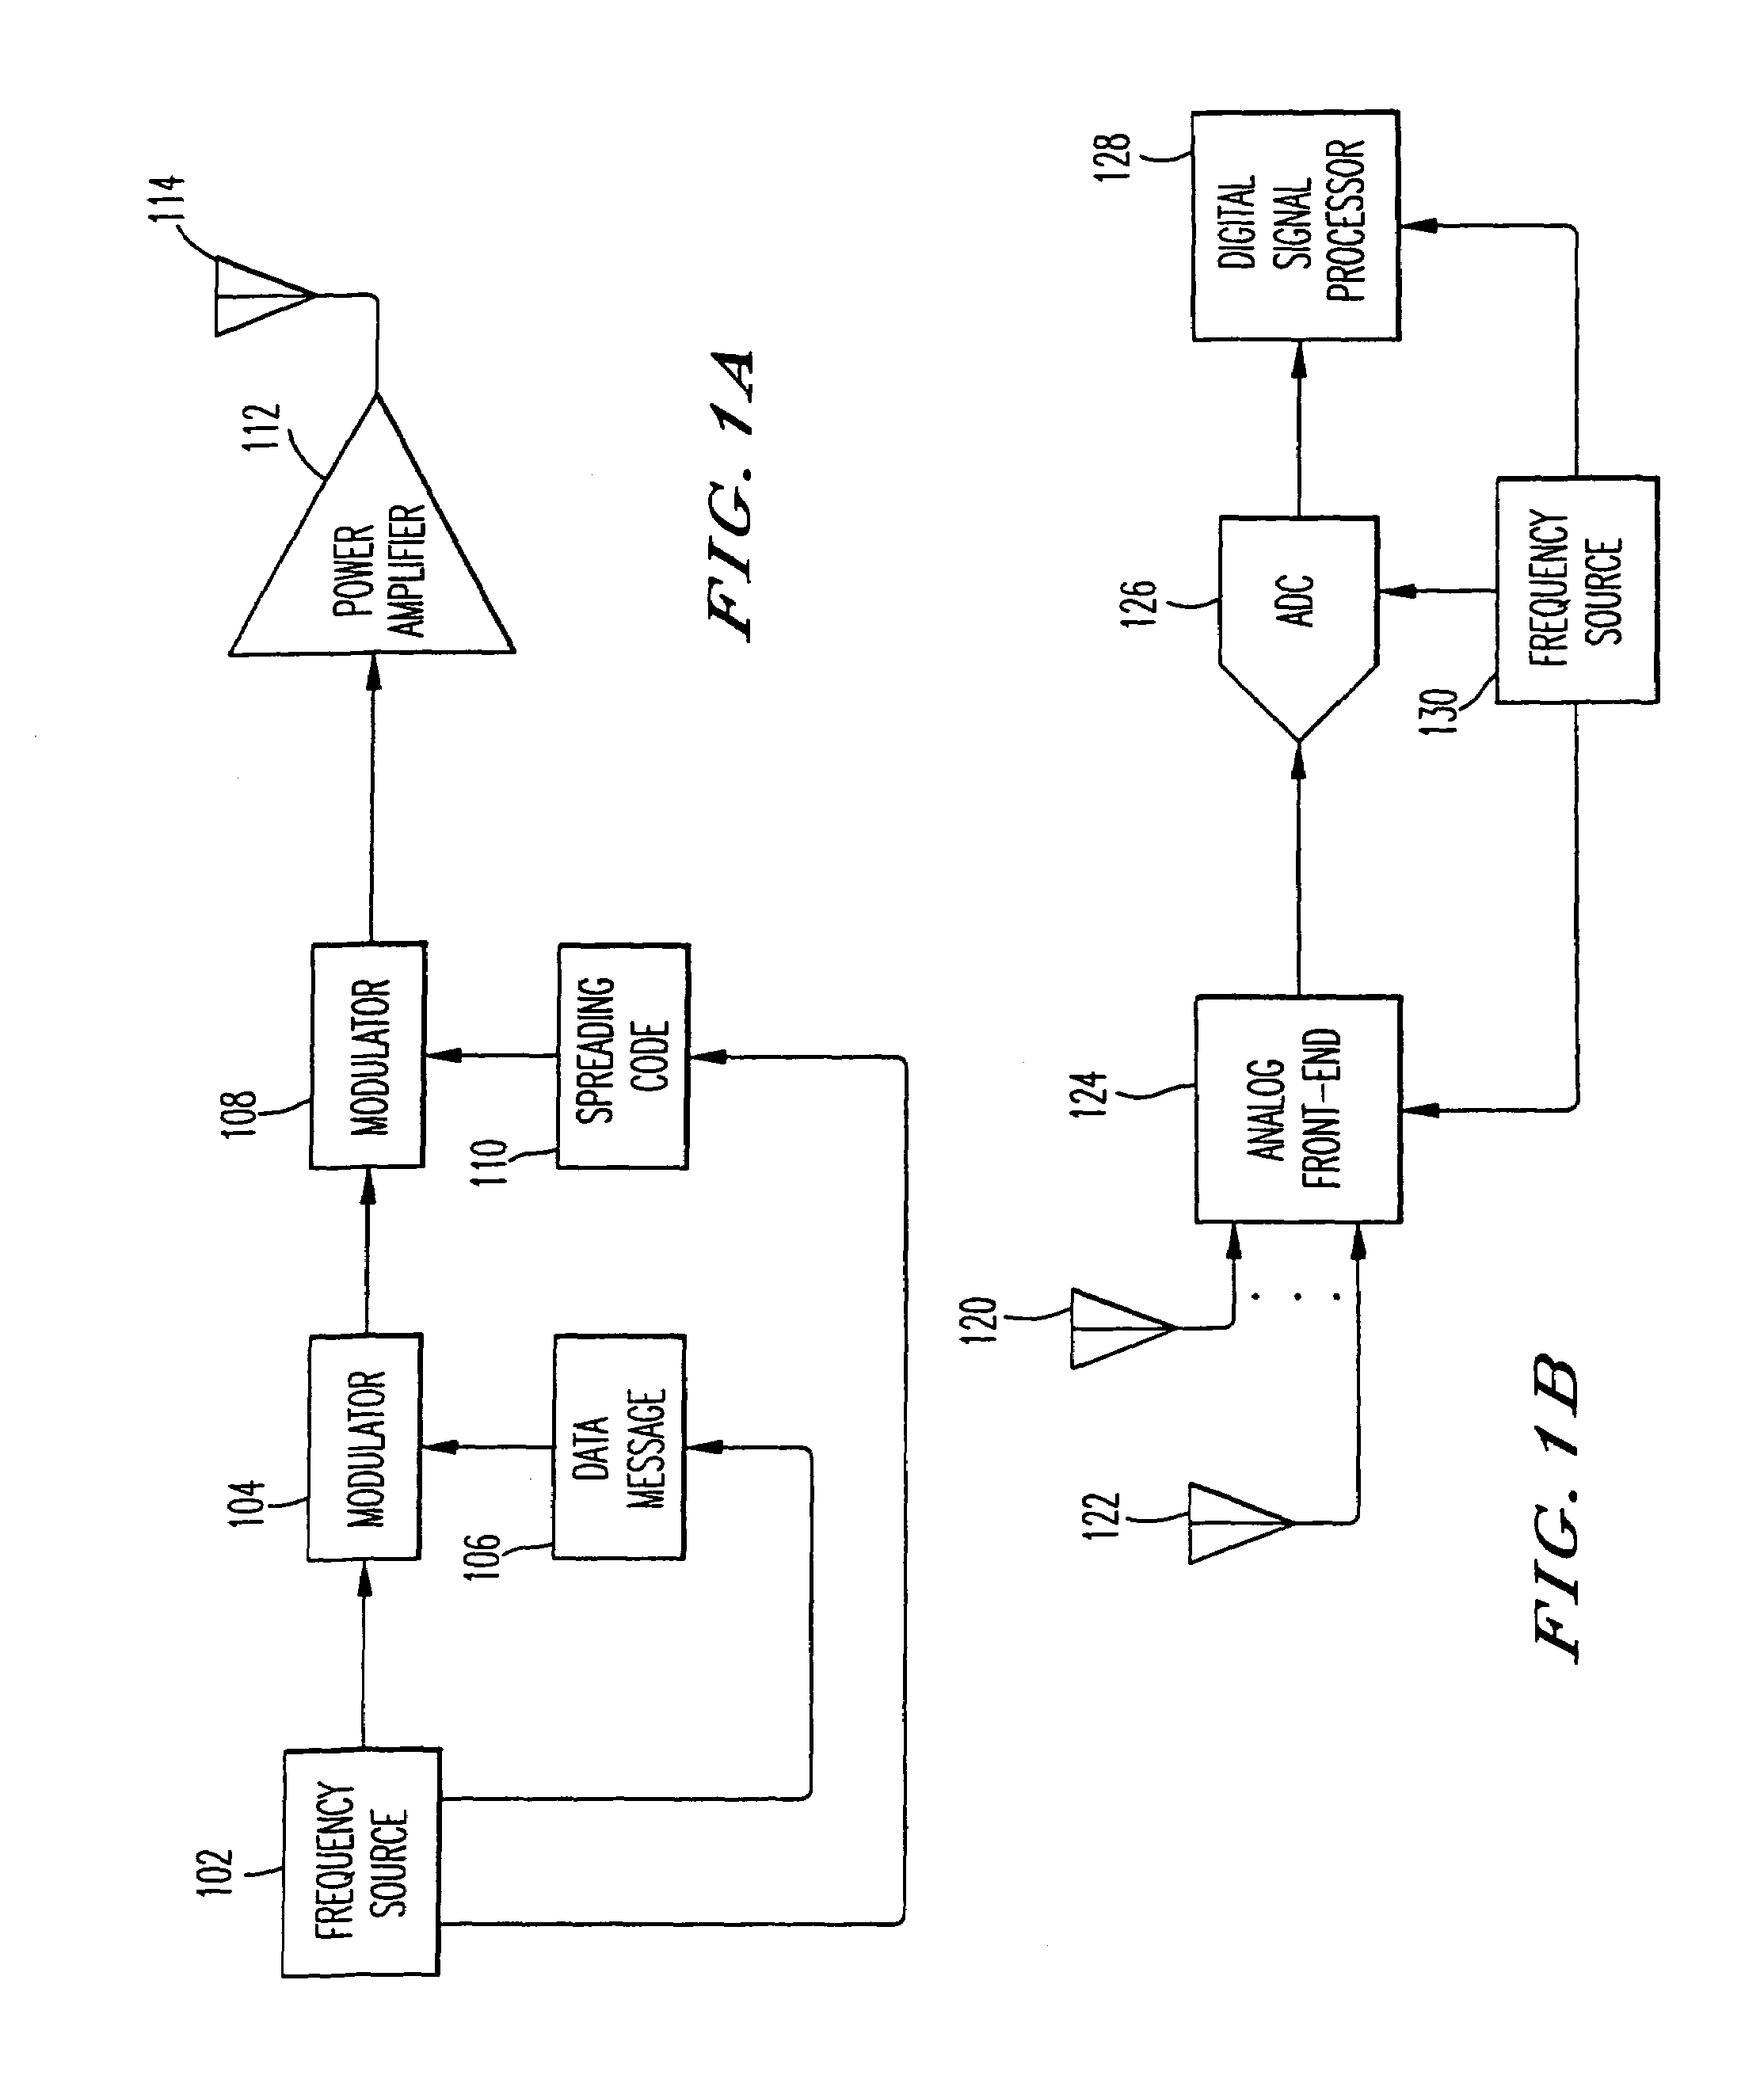 Narrow-band interference rejecting spread spectrum radio system and method